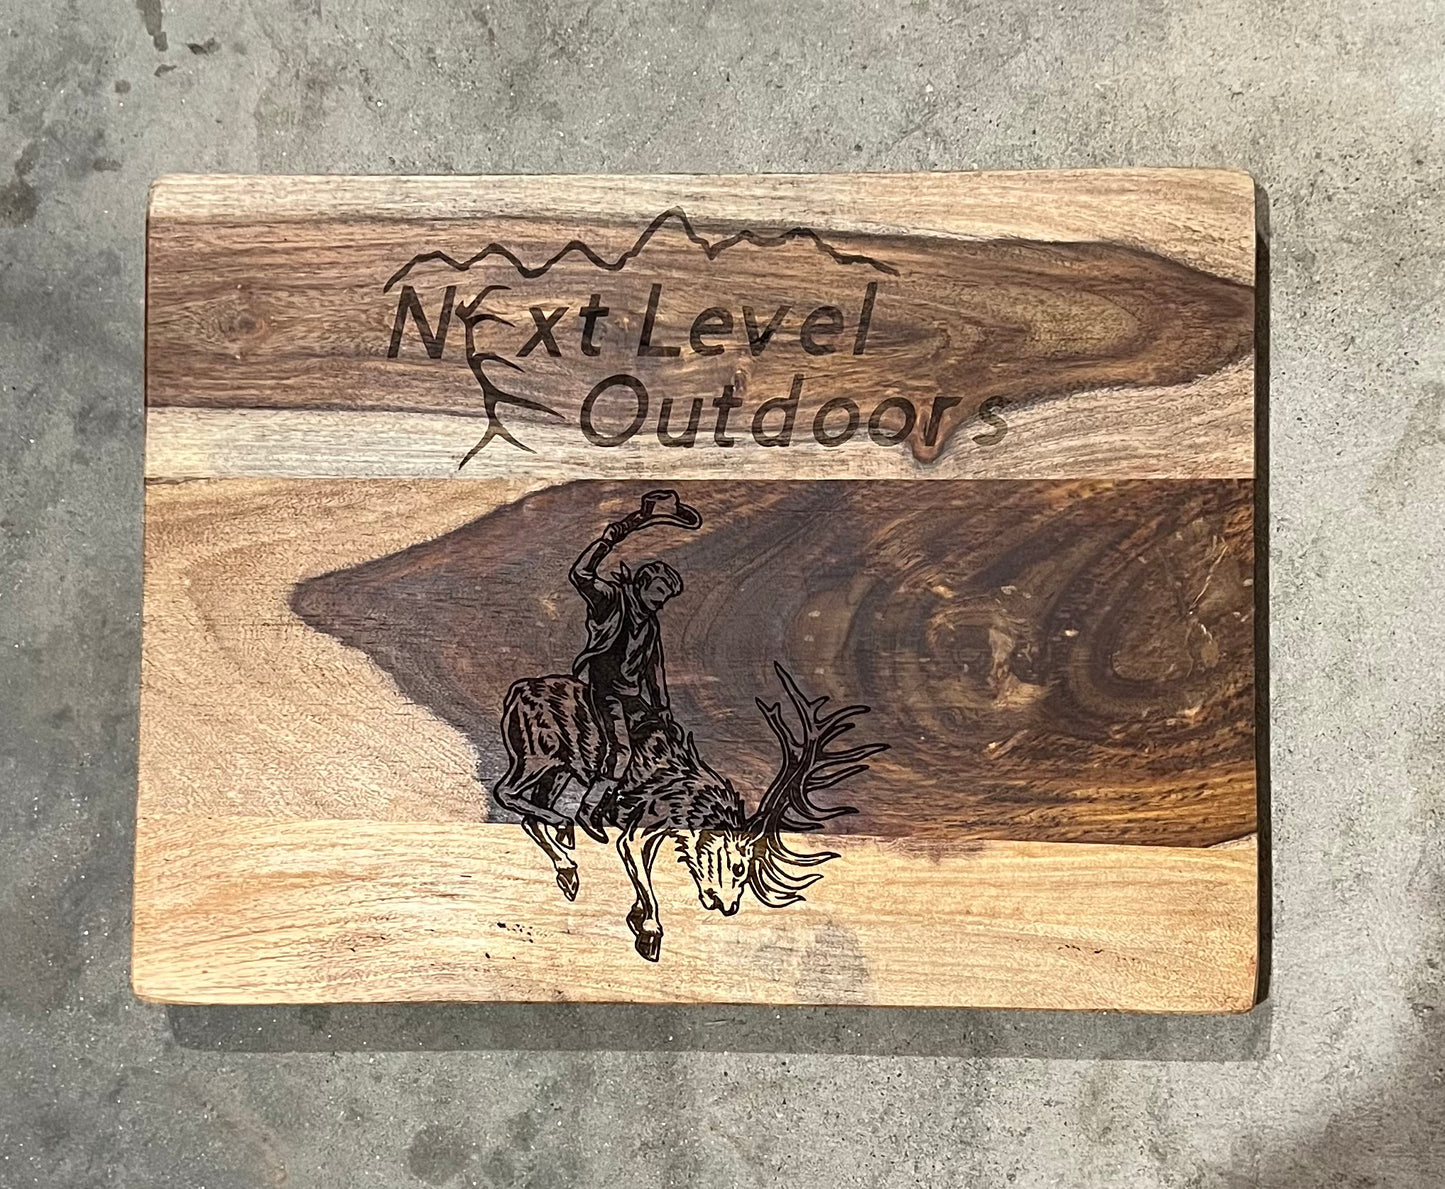 Laser Engraved Cutting Board